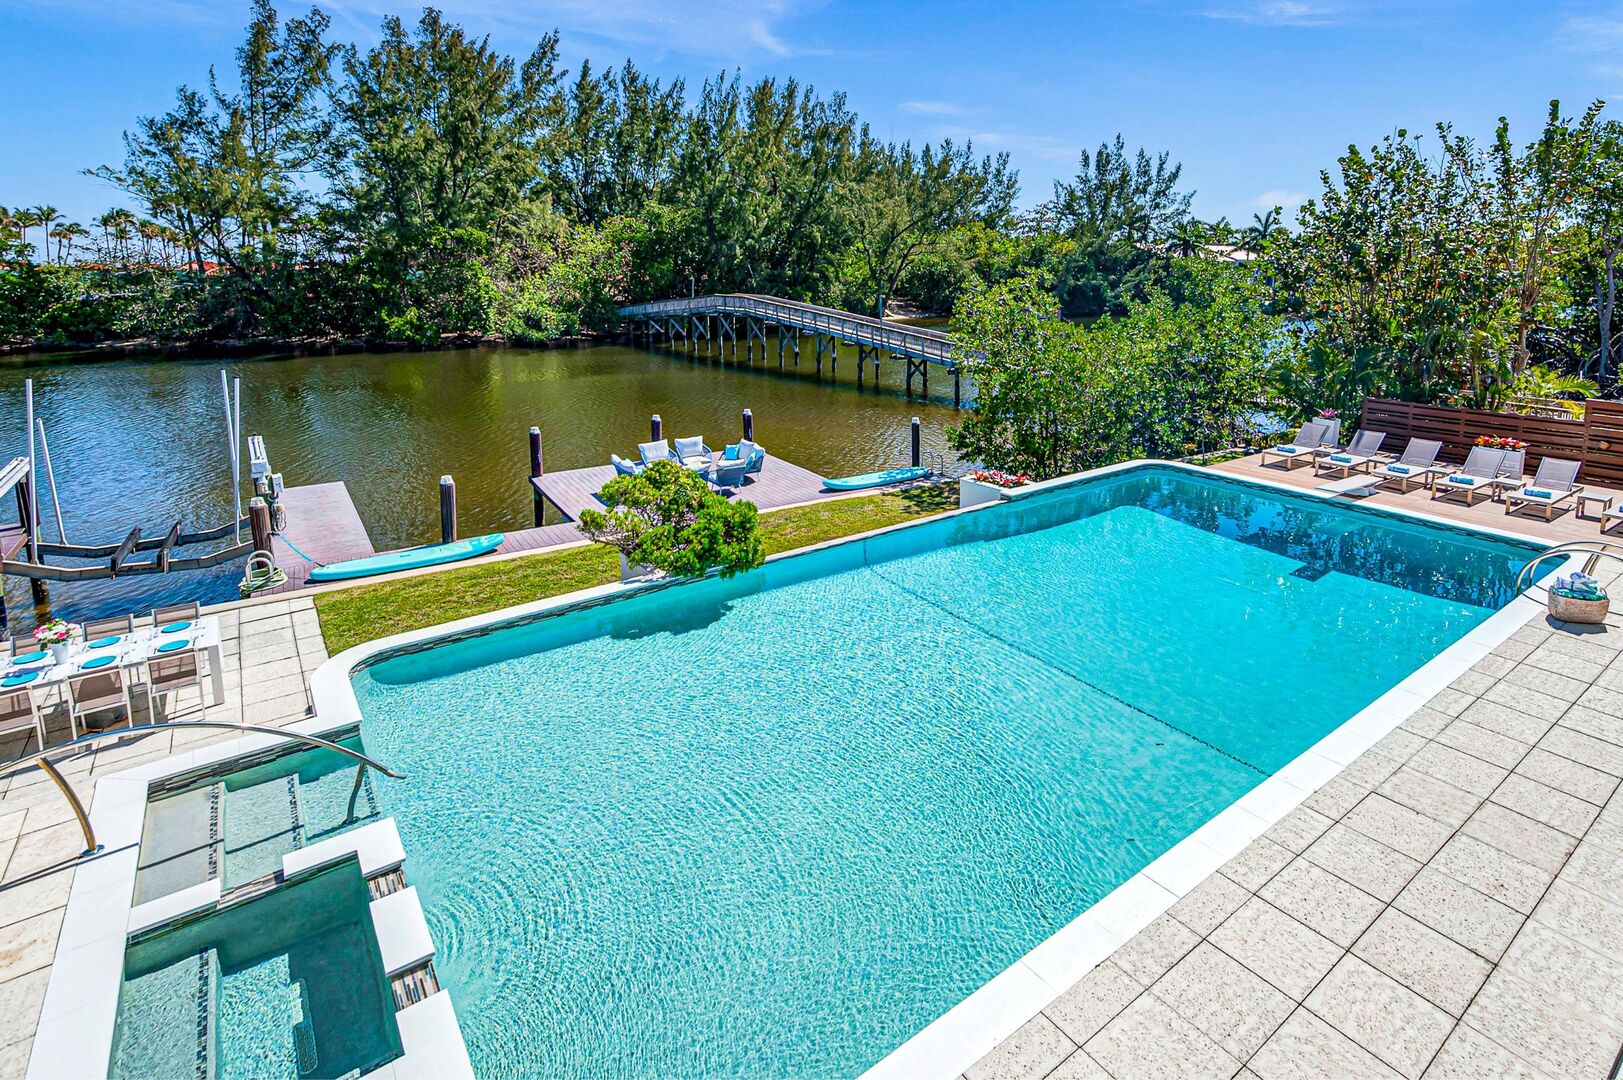 Relish in the tranquility of the hot tub and oversized heated pool featuring waterfront views in the privacy of the Mayan Lake.